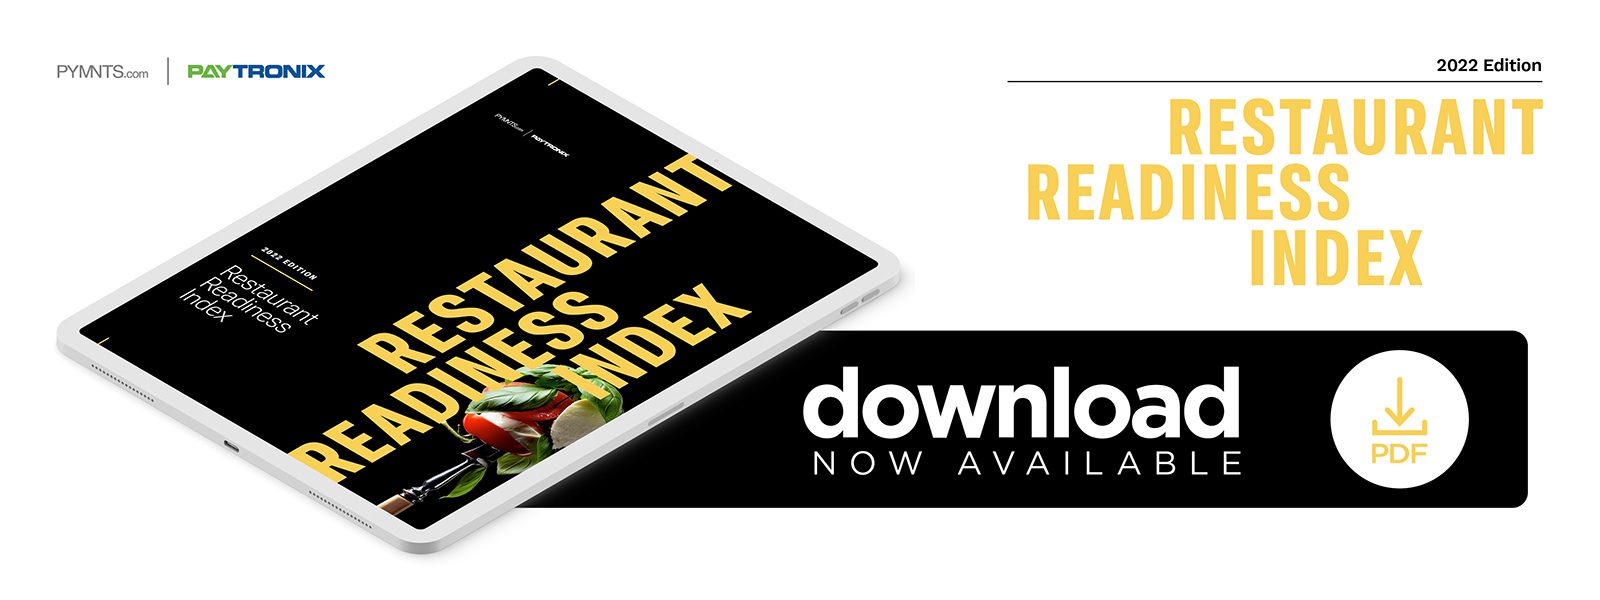 Paytronix - Restaurant Readiness - July 2022 - Discover how restaurants are responding to consumers' changing digital tastes